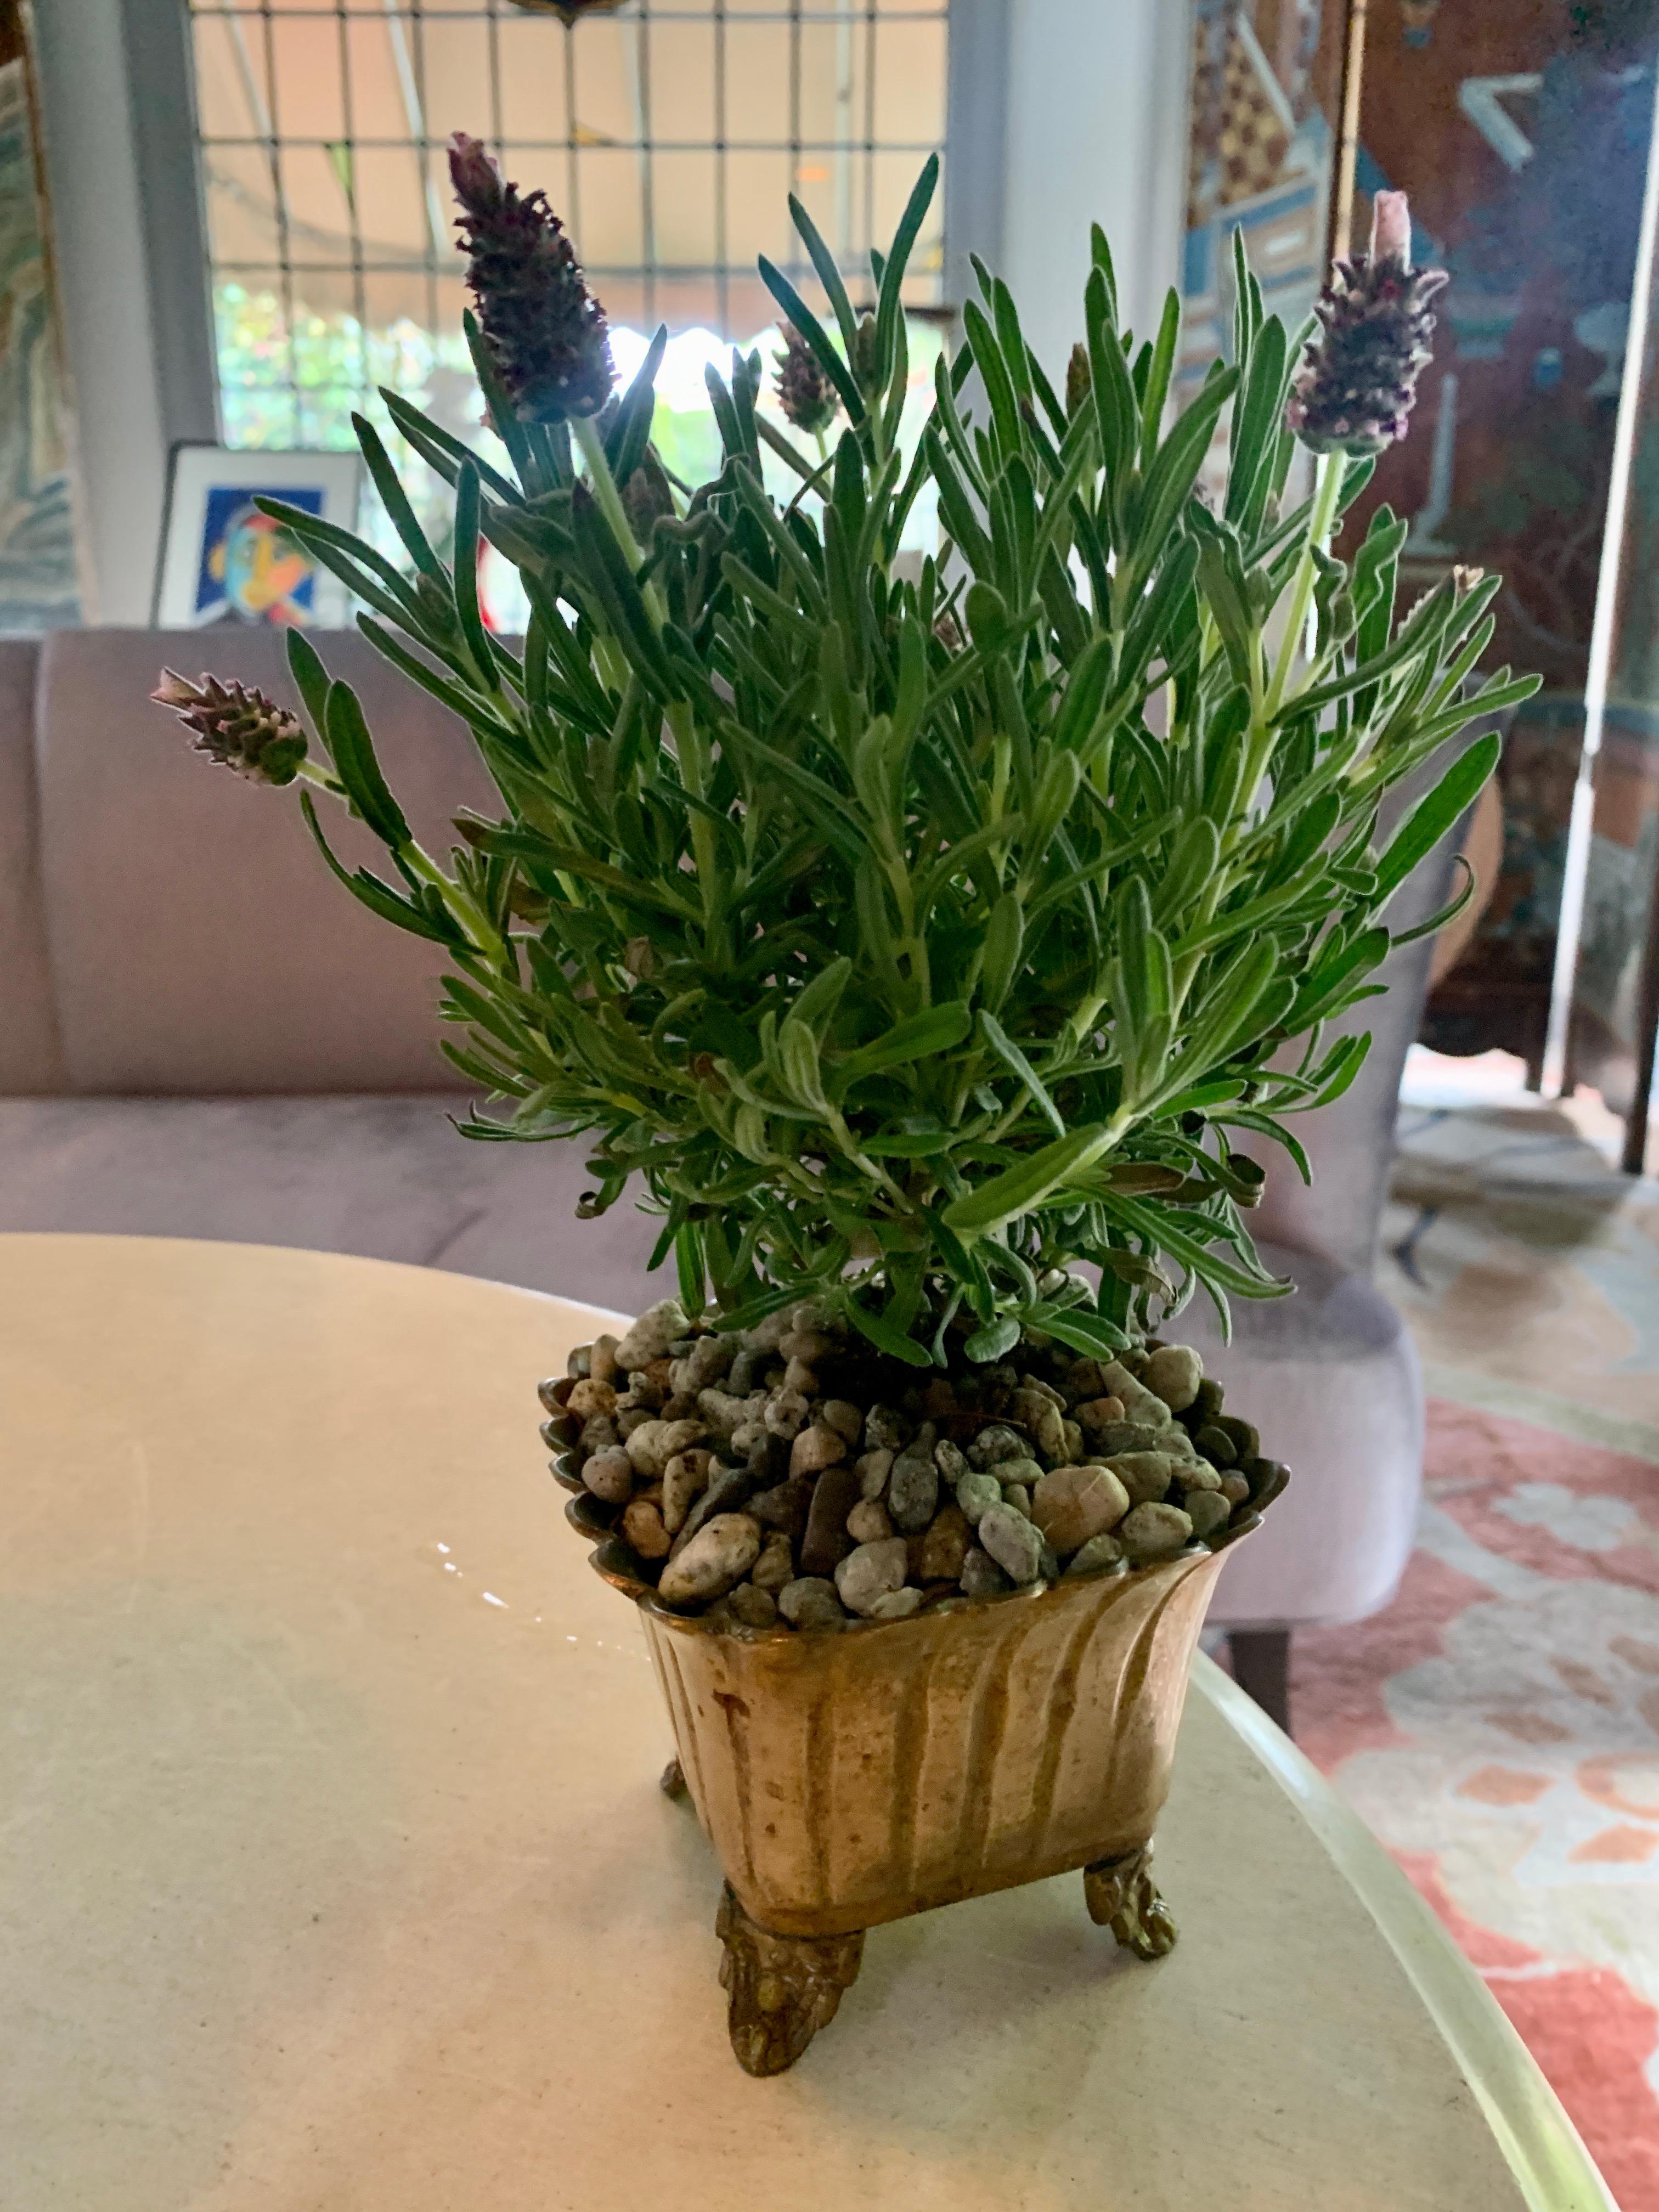 Small brass planter - ribbed, with feet, this petite planter is very sweet and wonderful for kitchen herbs, a small flower arrangement or collection. Likely Italian. Also, works well for a small orchid.